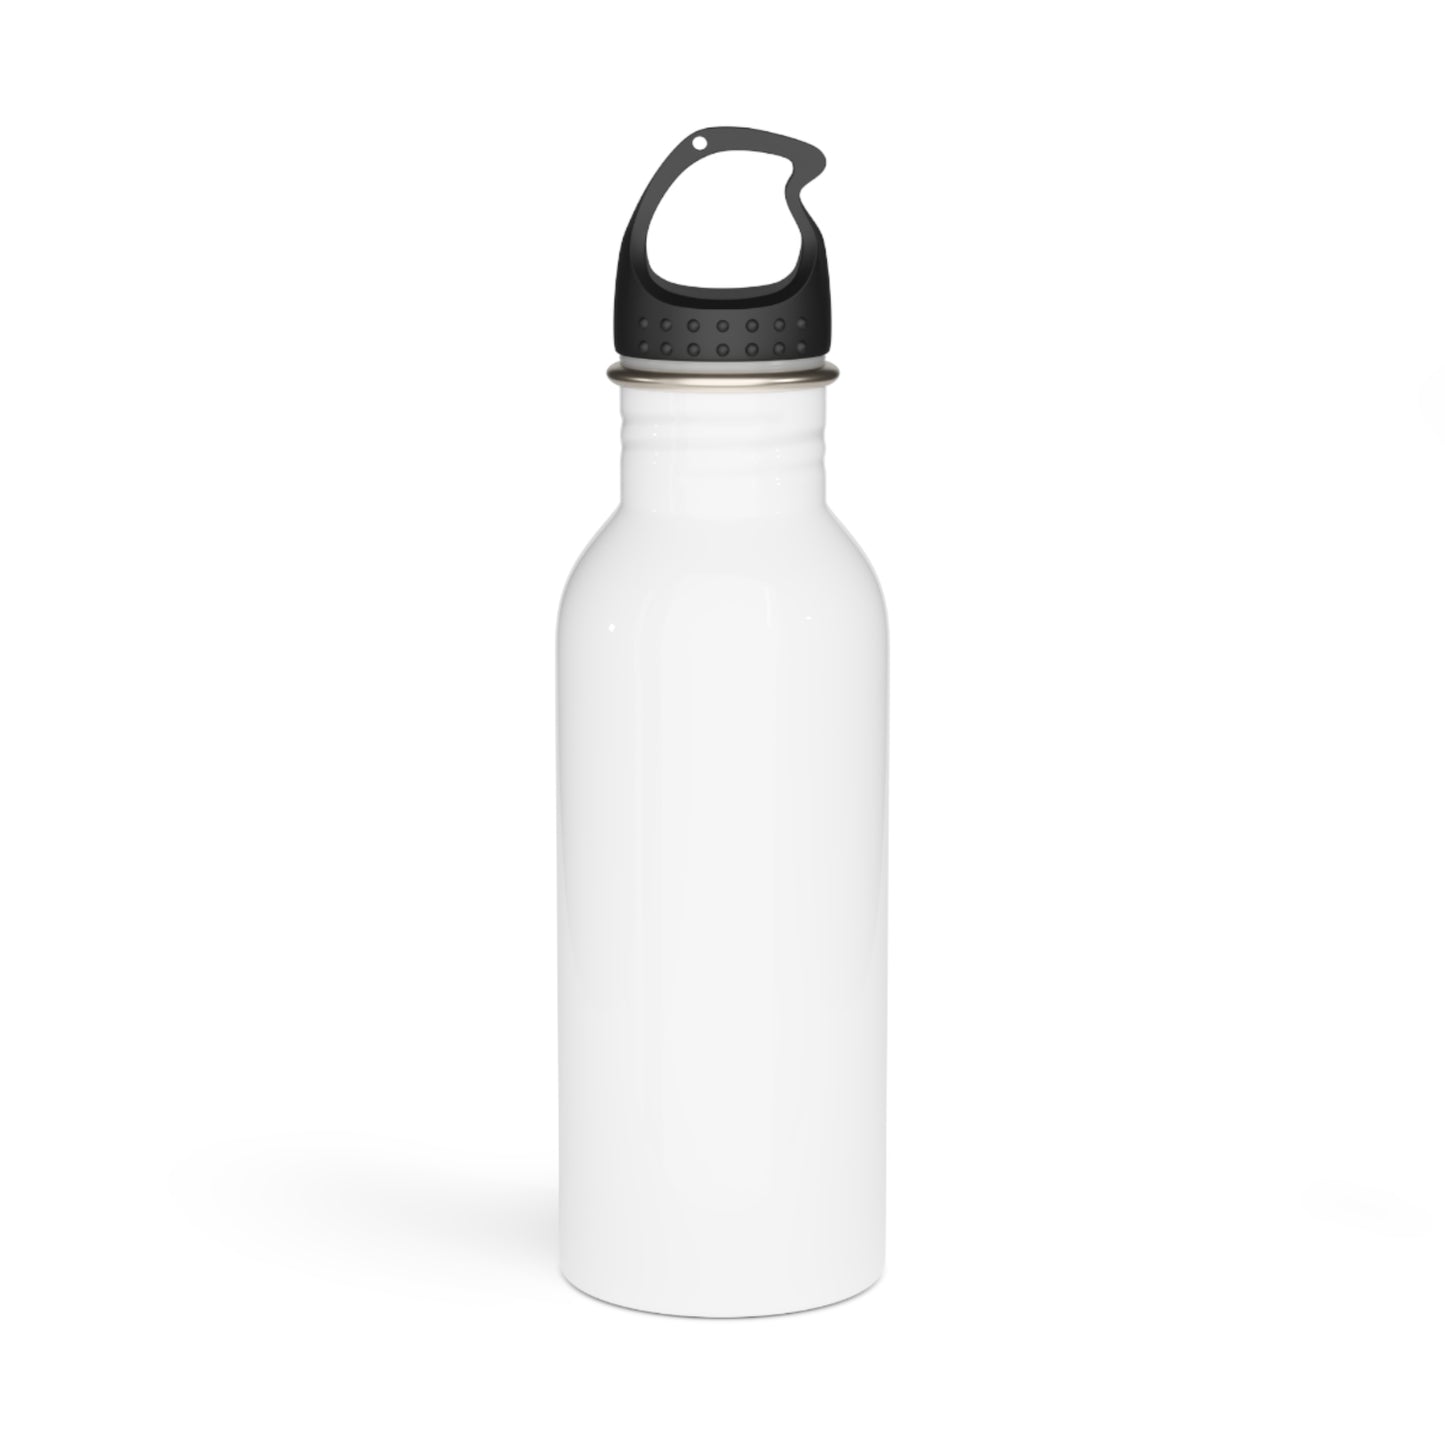 Maui Strong AF Stainless Steel Water Bottle